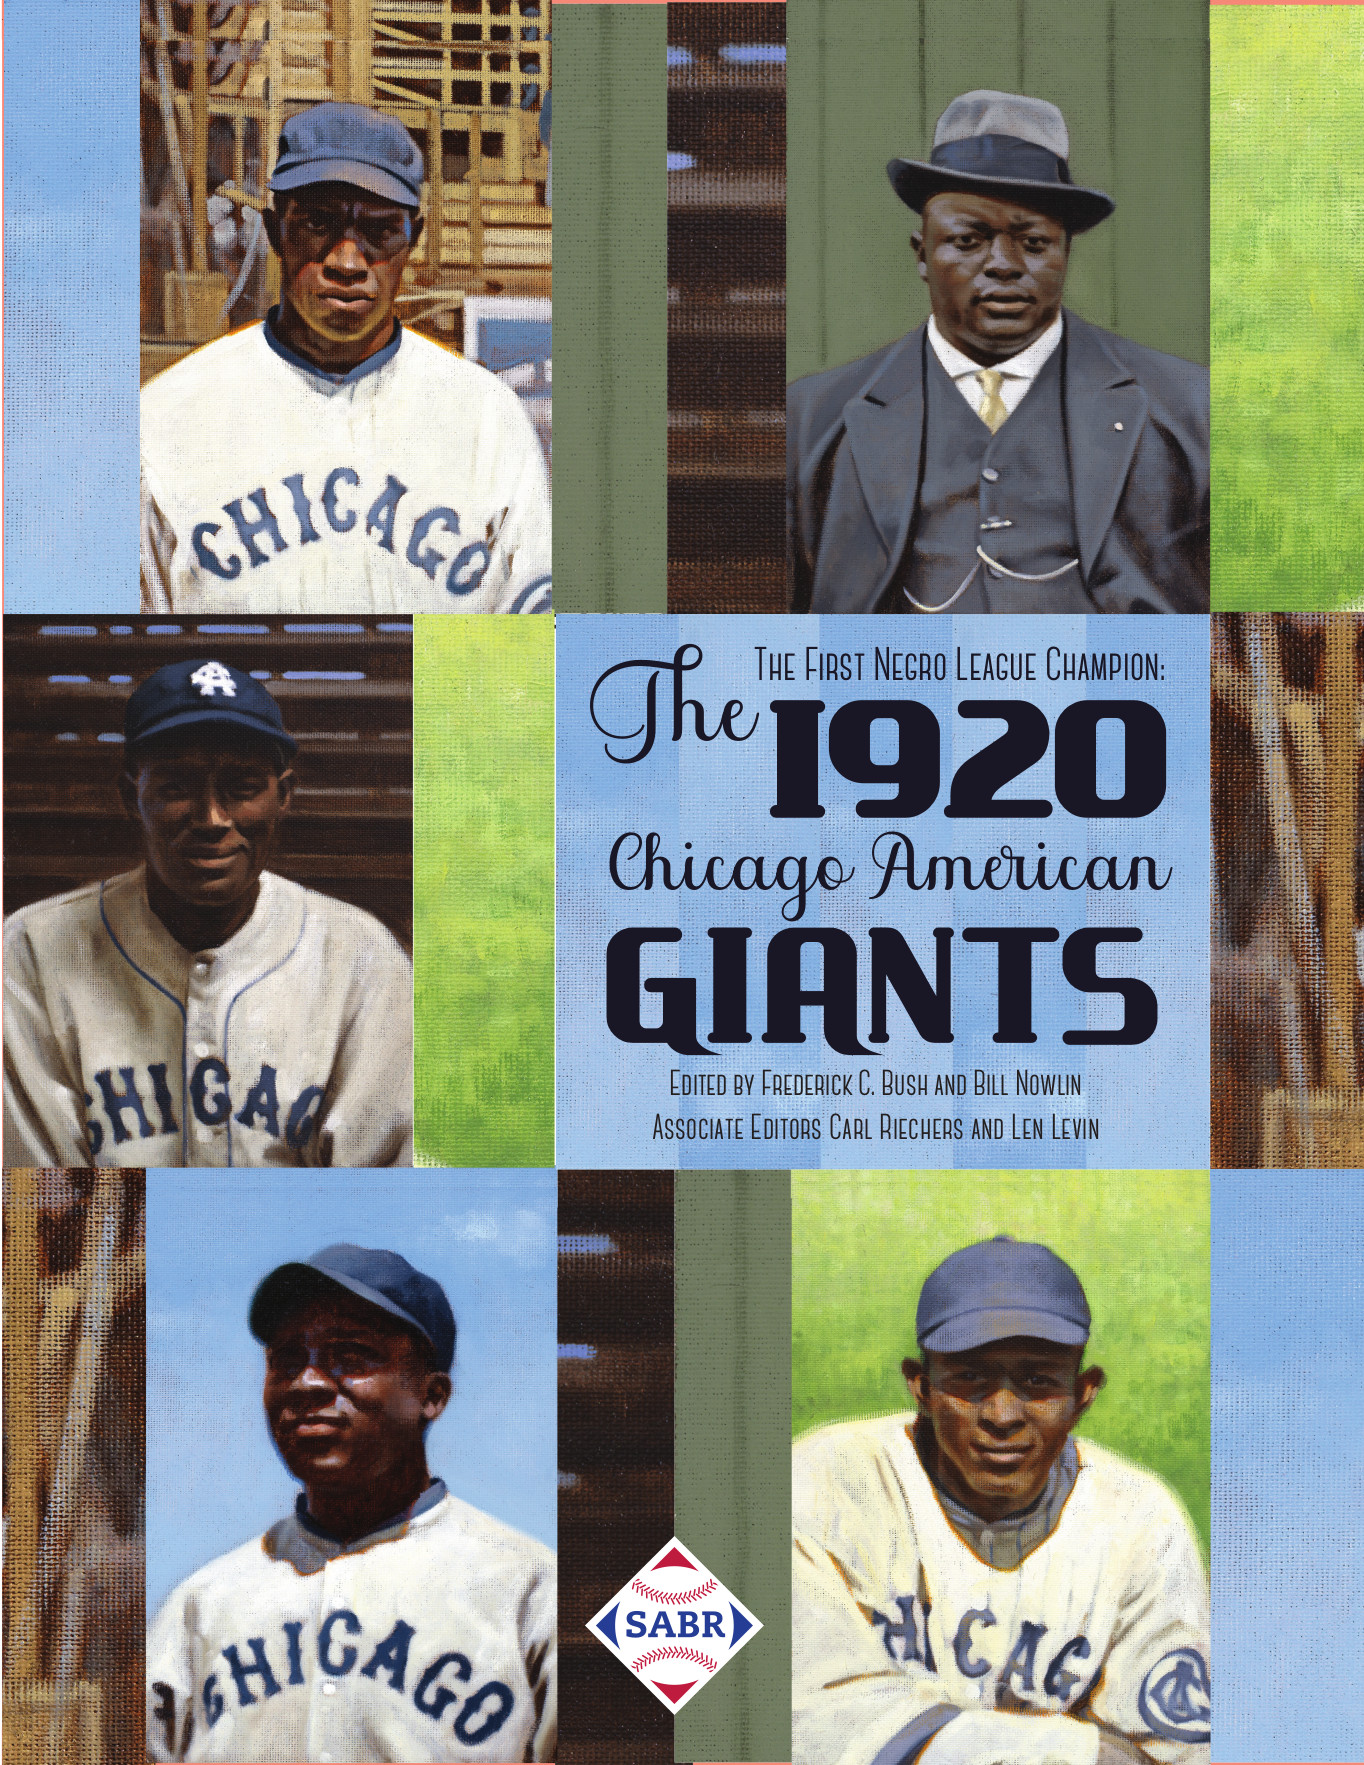 The First Negro League Champion: The 1920 Chicago American Giants, edited by Frederick C. Bush and Bill Nowlin